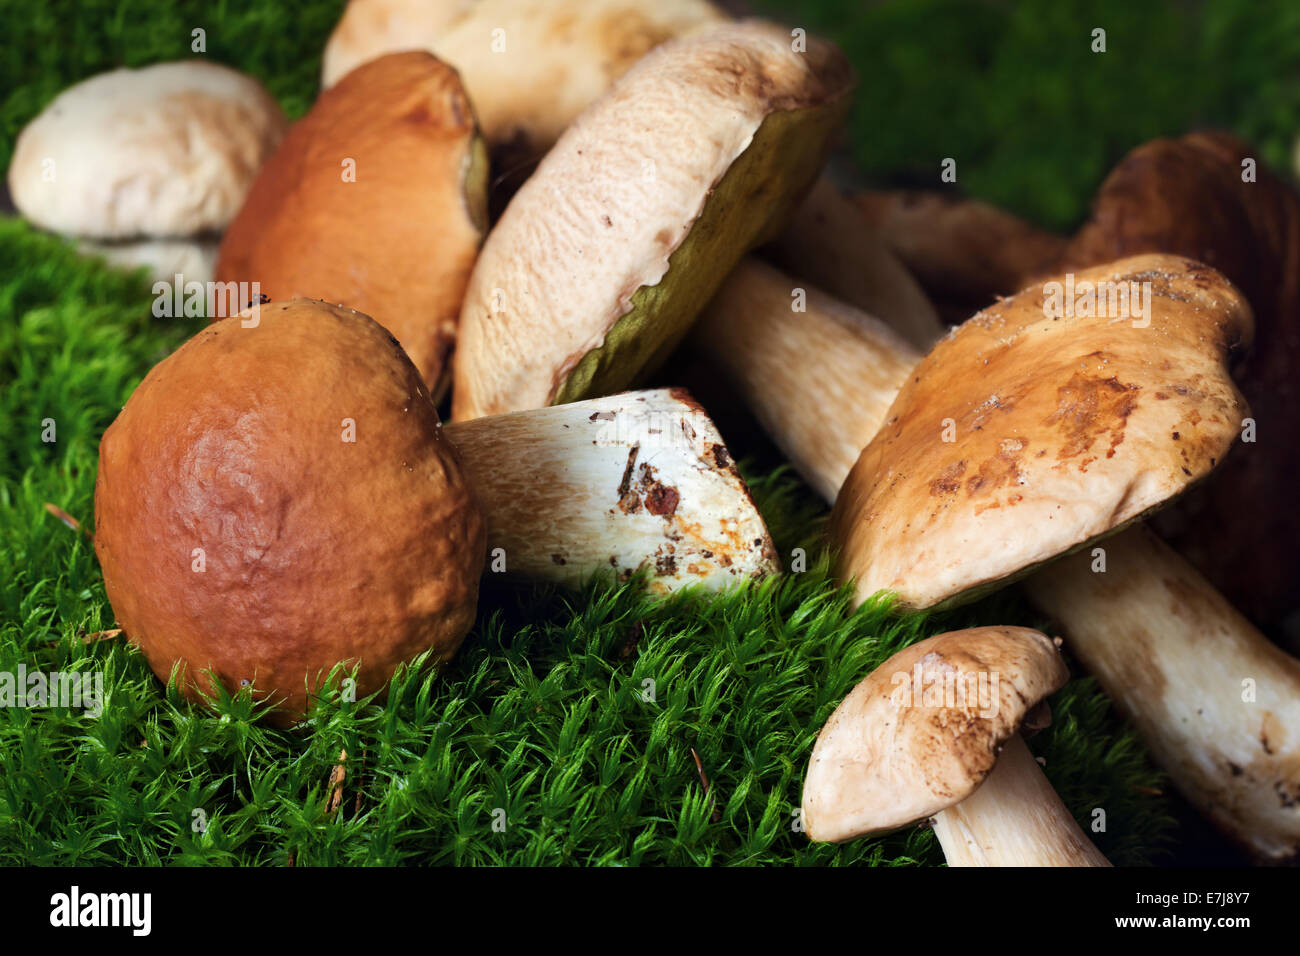 A bunch of mushrooms (porcini) on moss Stock Photo